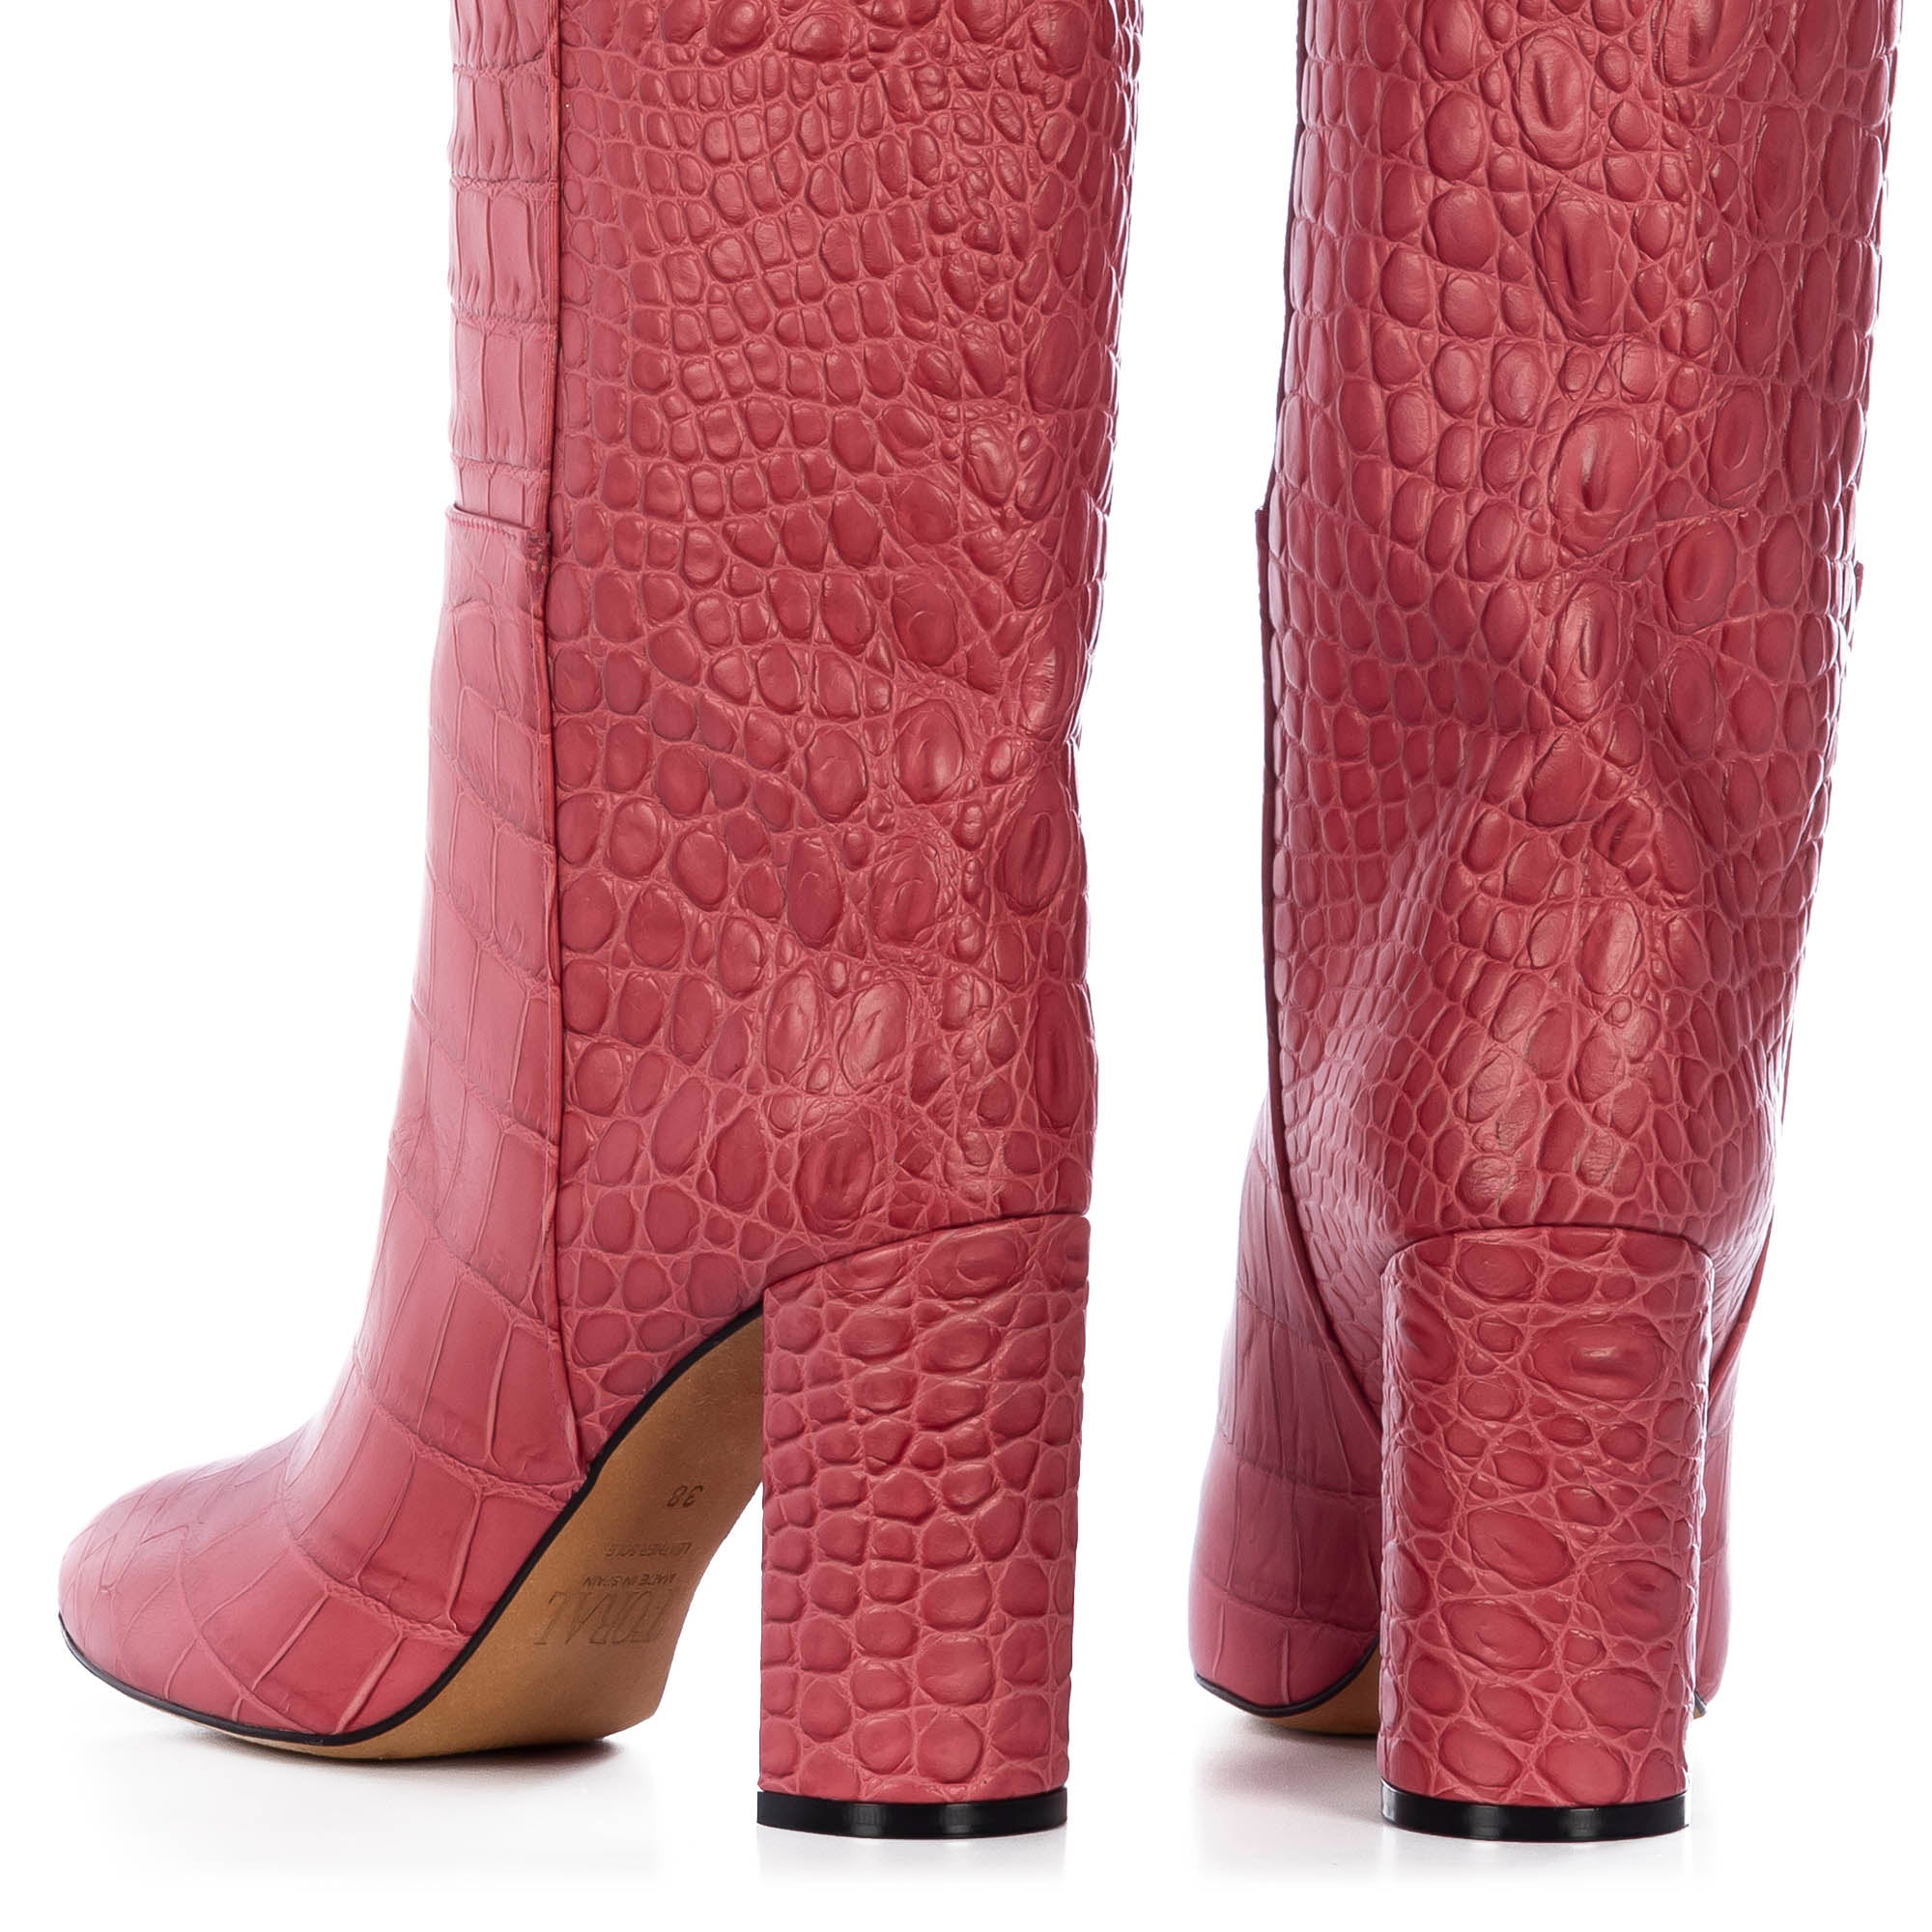 LAMPONE TALL BOOTS WITH ANIMAL PRINT